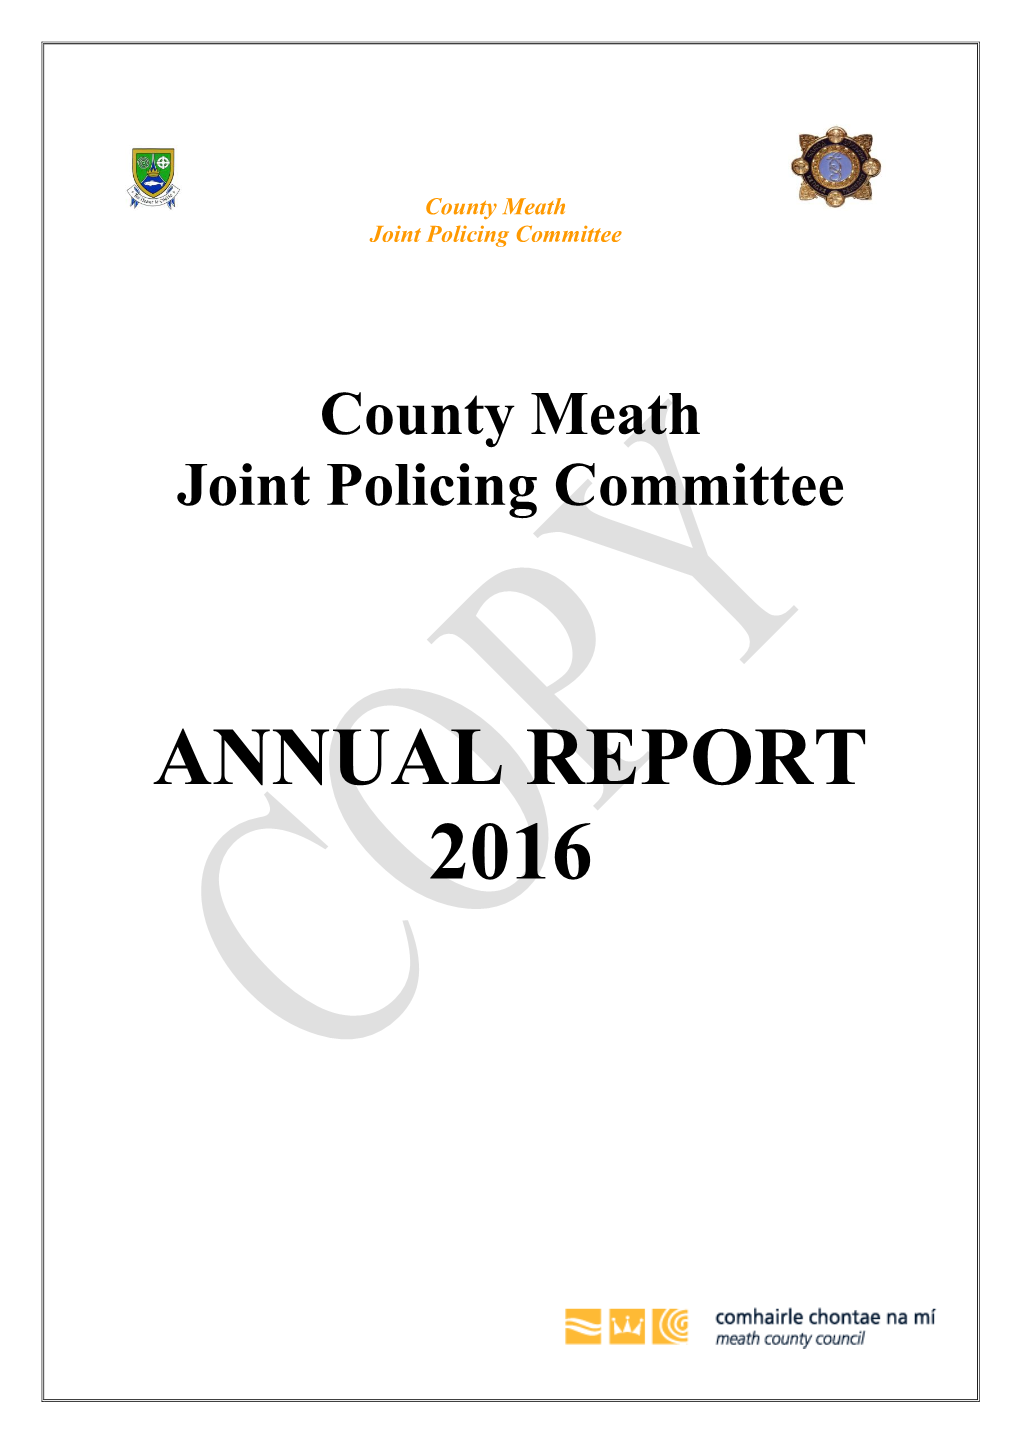 County Meath Joint Policing Committee